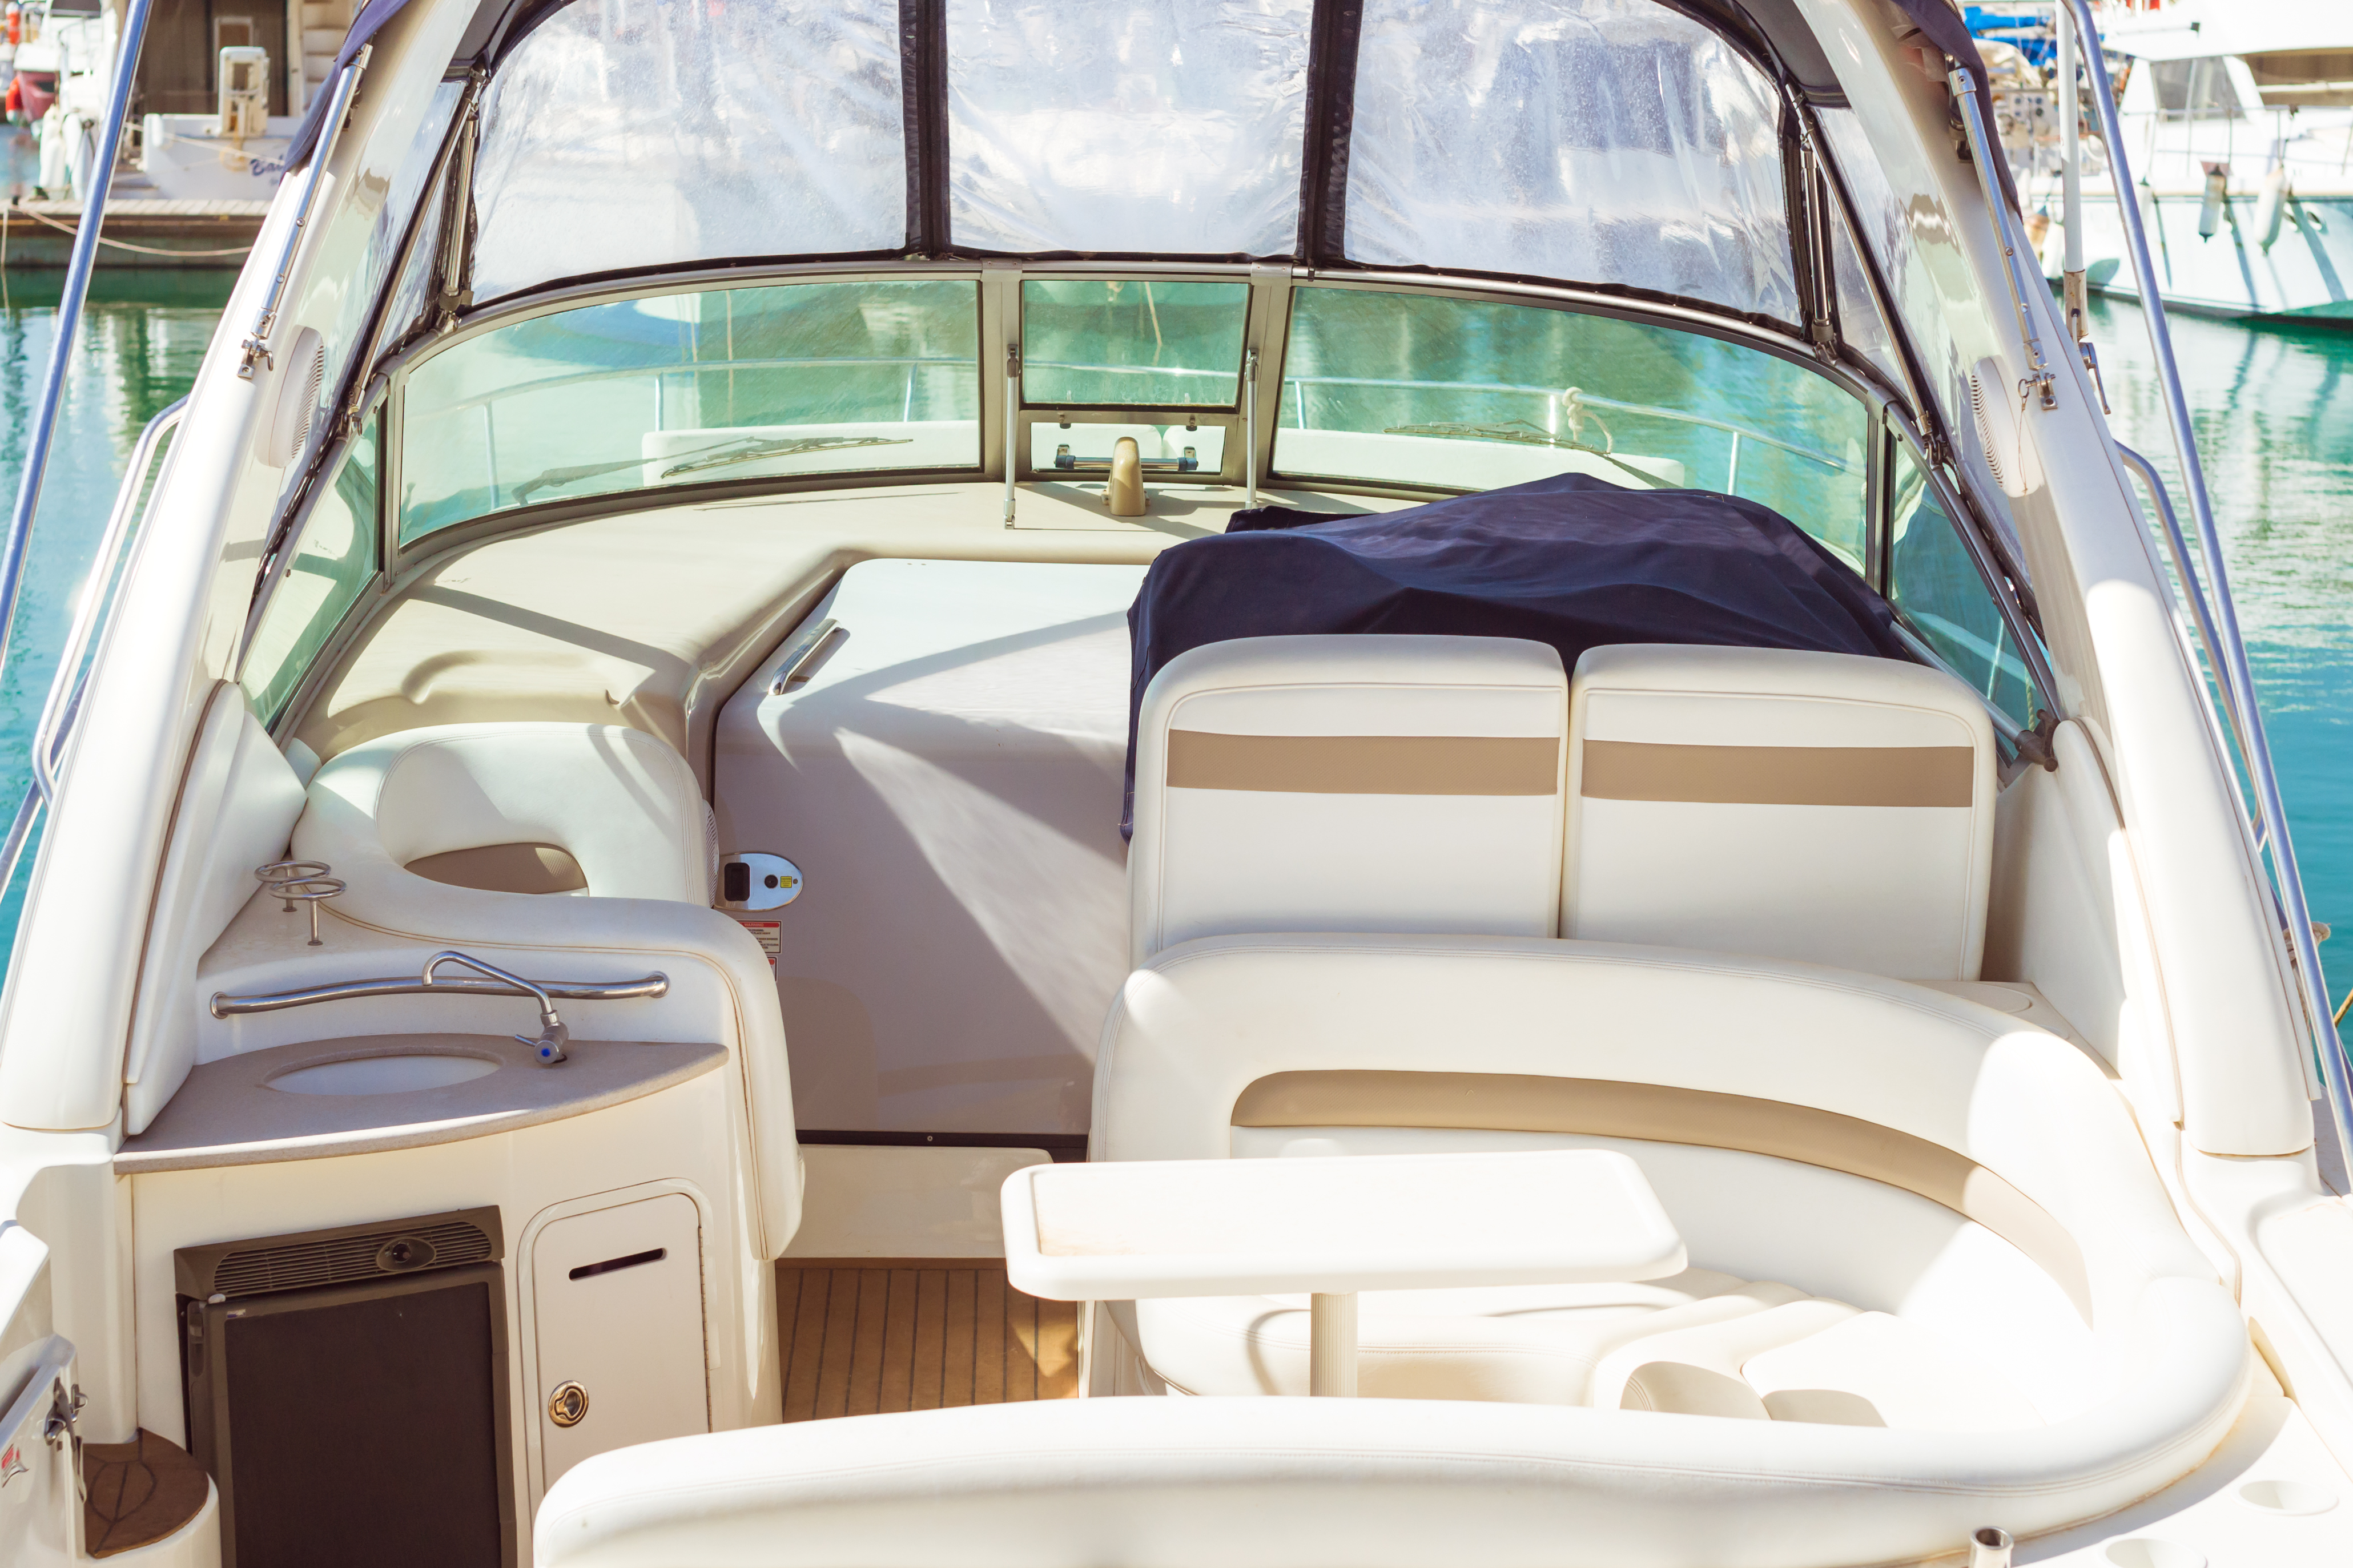 clean-and-shiny-boat-interior-ready-for-sale